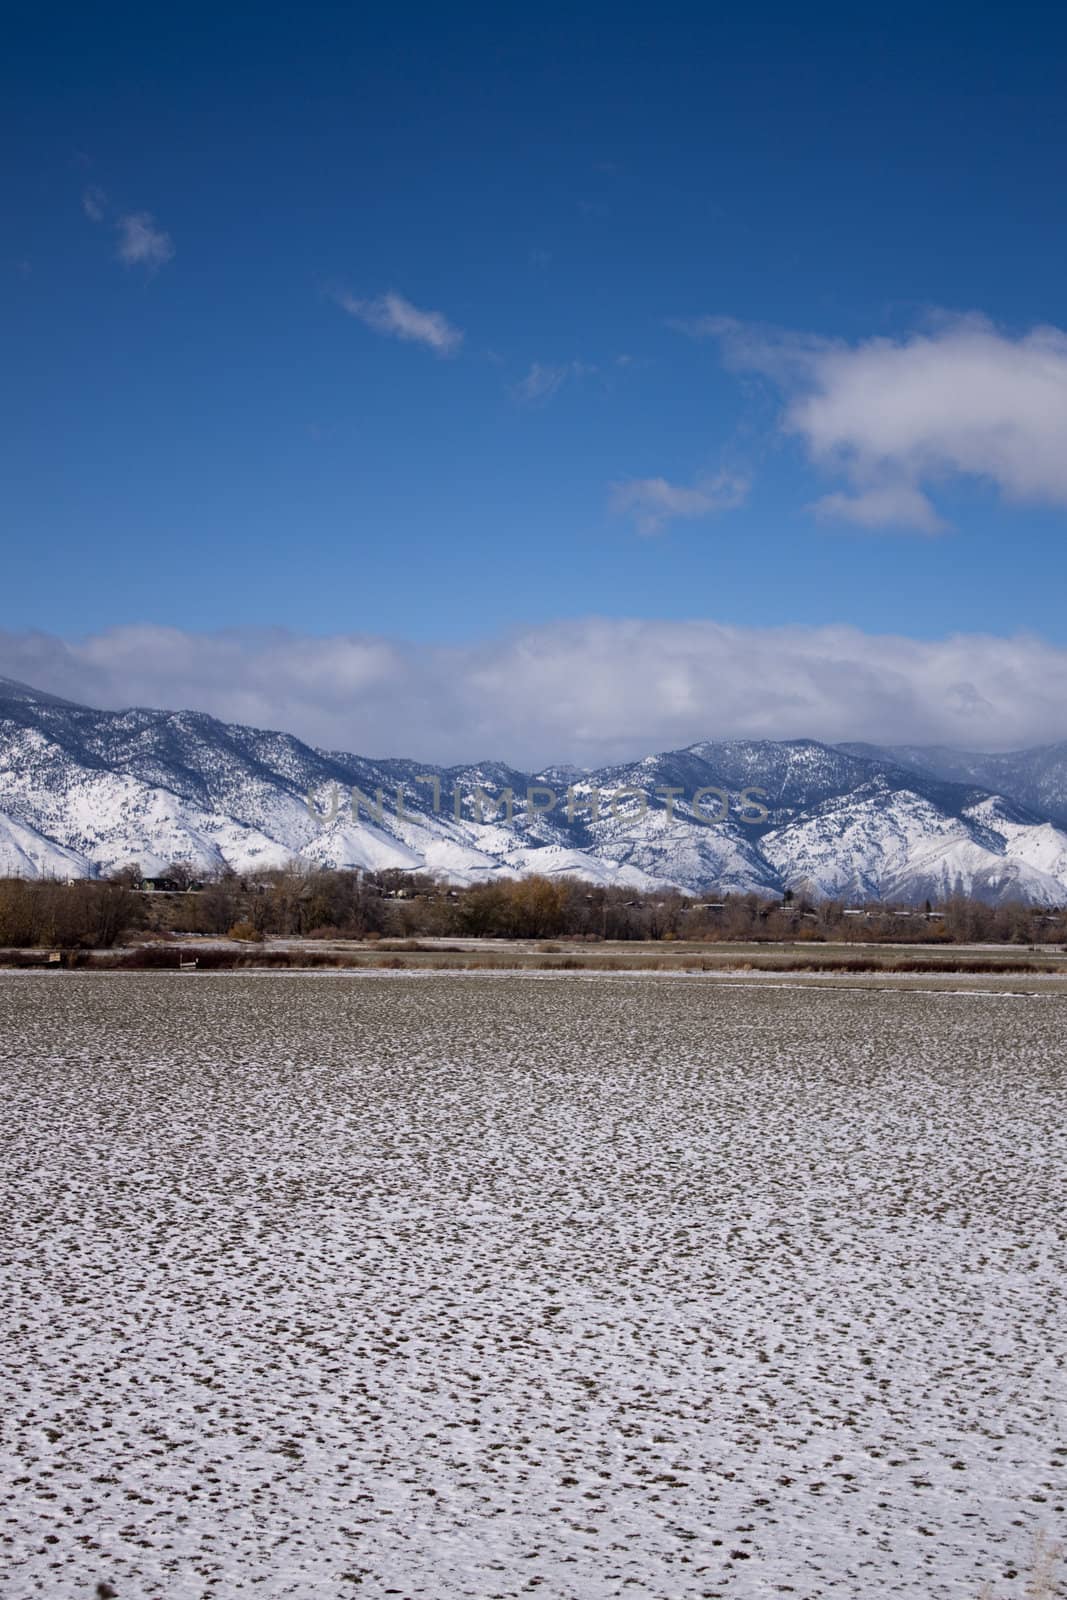 A high desert mountain range with snow on it.farm country